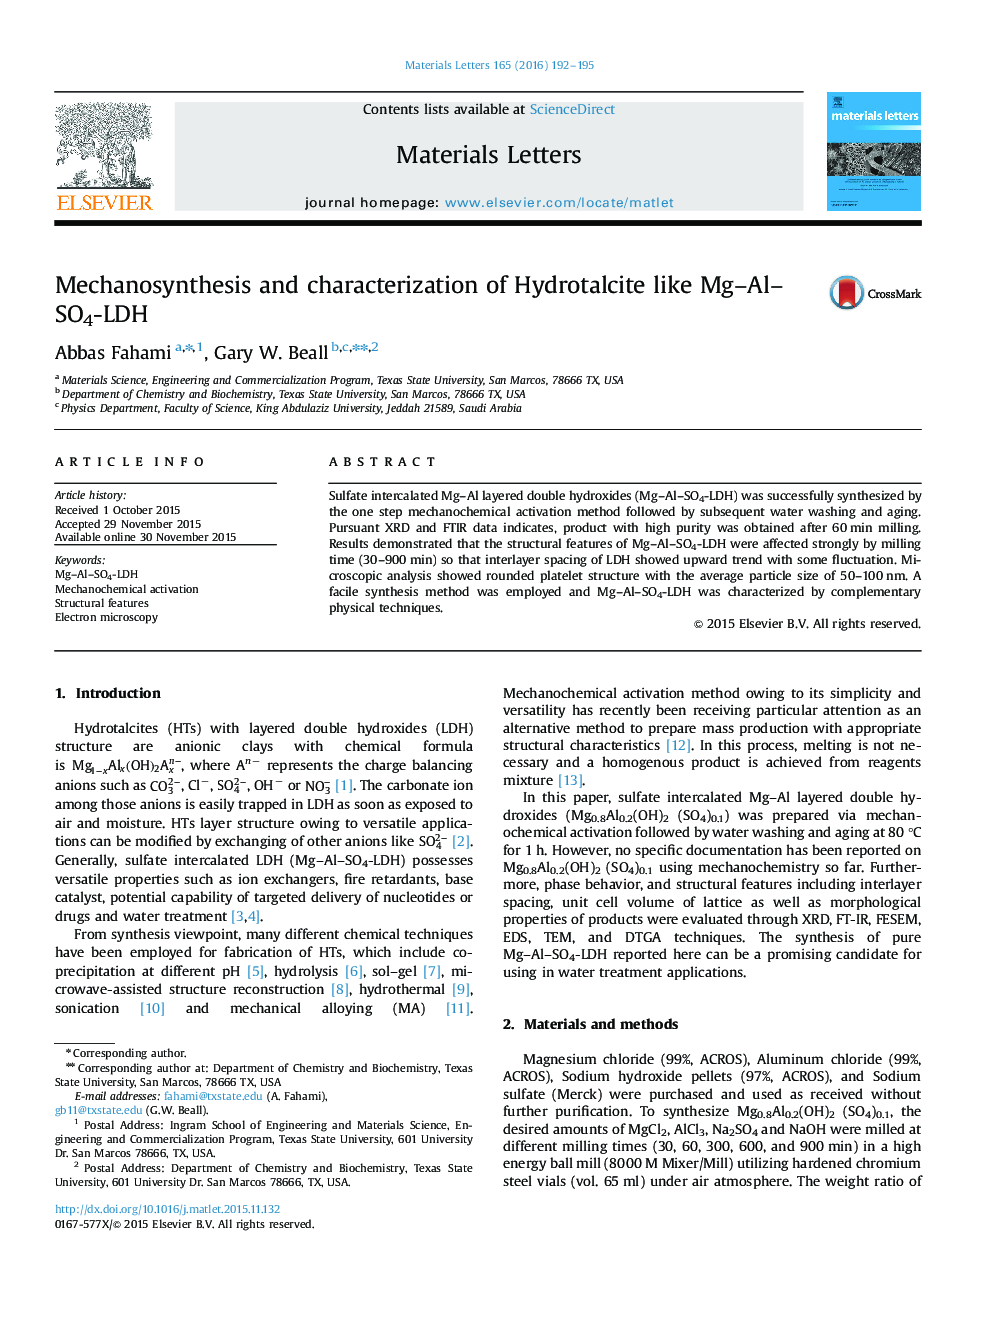 Mechanosynthesis and characterization of Hydrotalcite like Mg–Al–SO4-LDH